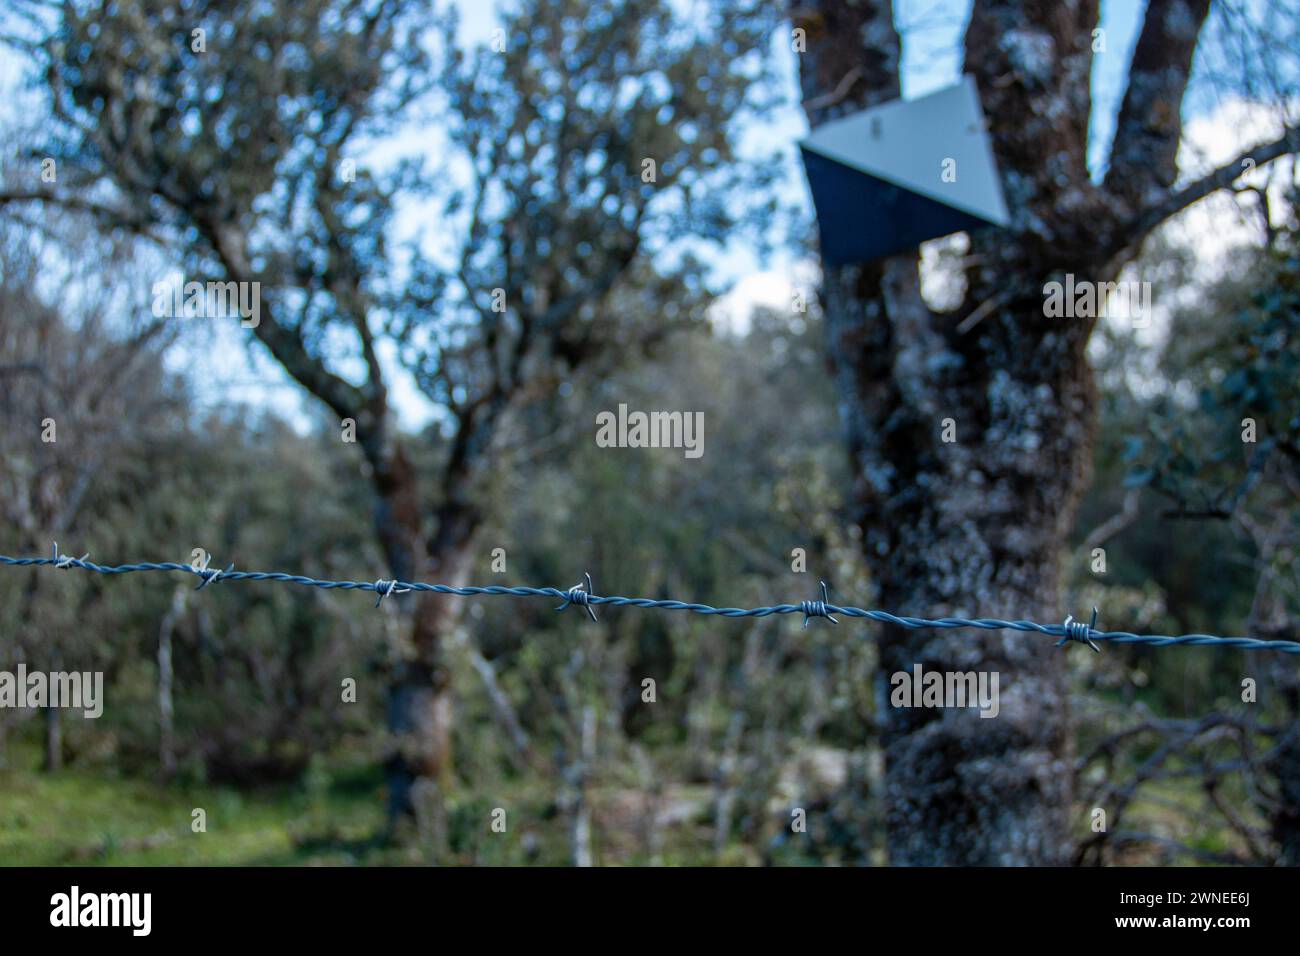 'Private hunting reserve' sign on a country property where it is delimited by metal fences Stock Photo